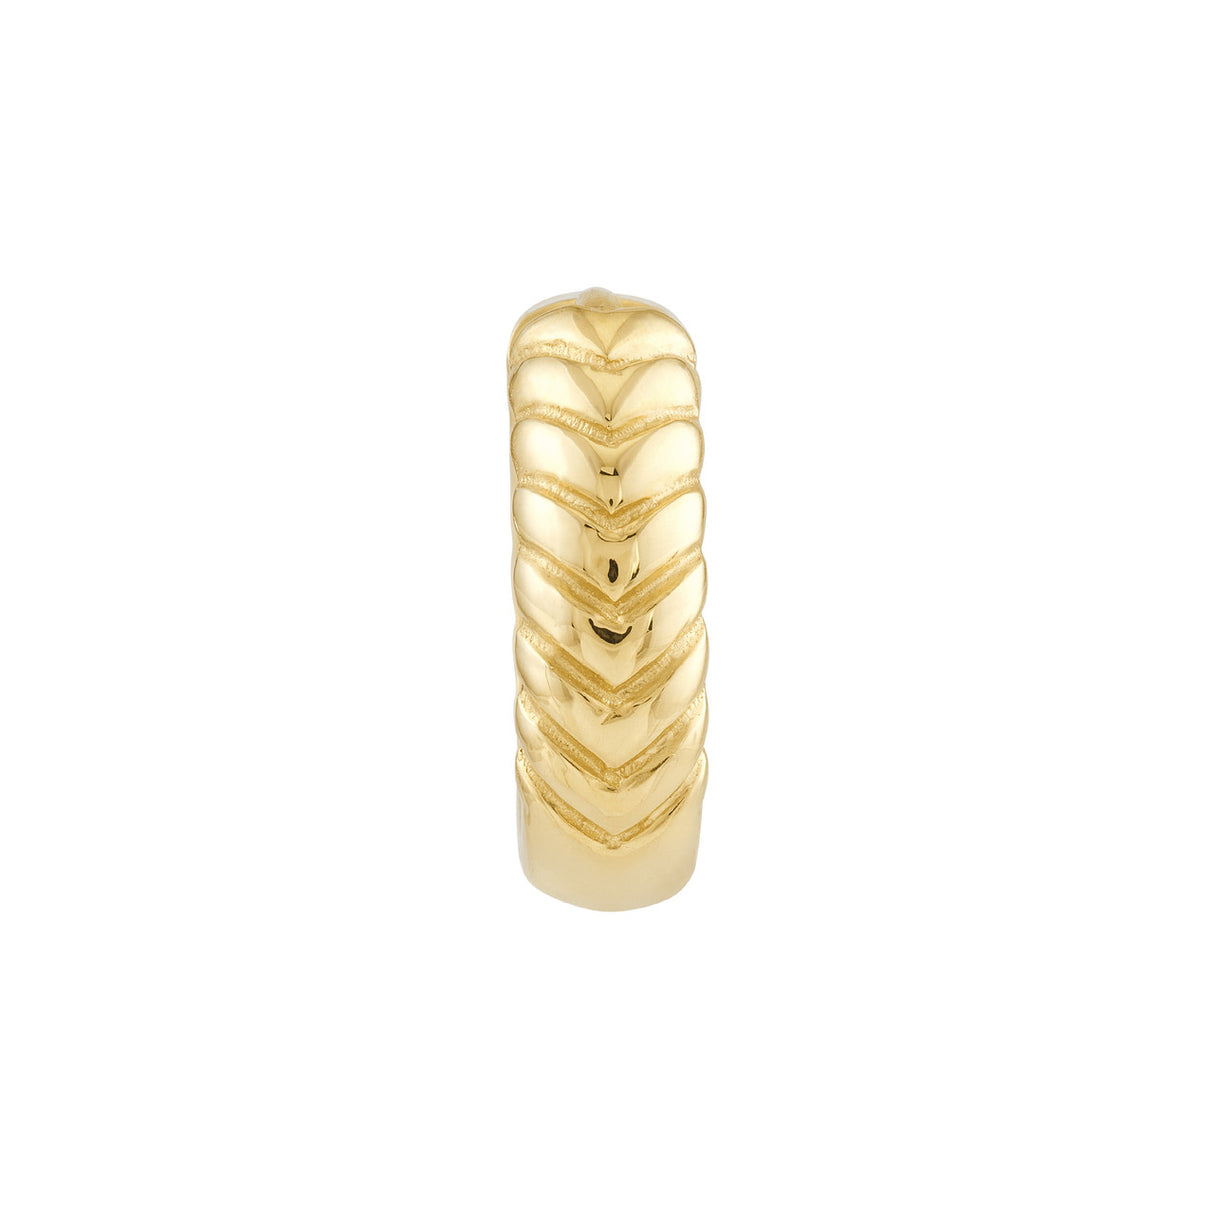 Crafted to perfection in resplendent 14K solid gold, these hoops radiate an enduring luminescence that's synonymous with elegance. The unique chevron twist adds a layer of depth and intrigue, making these more than just earrings